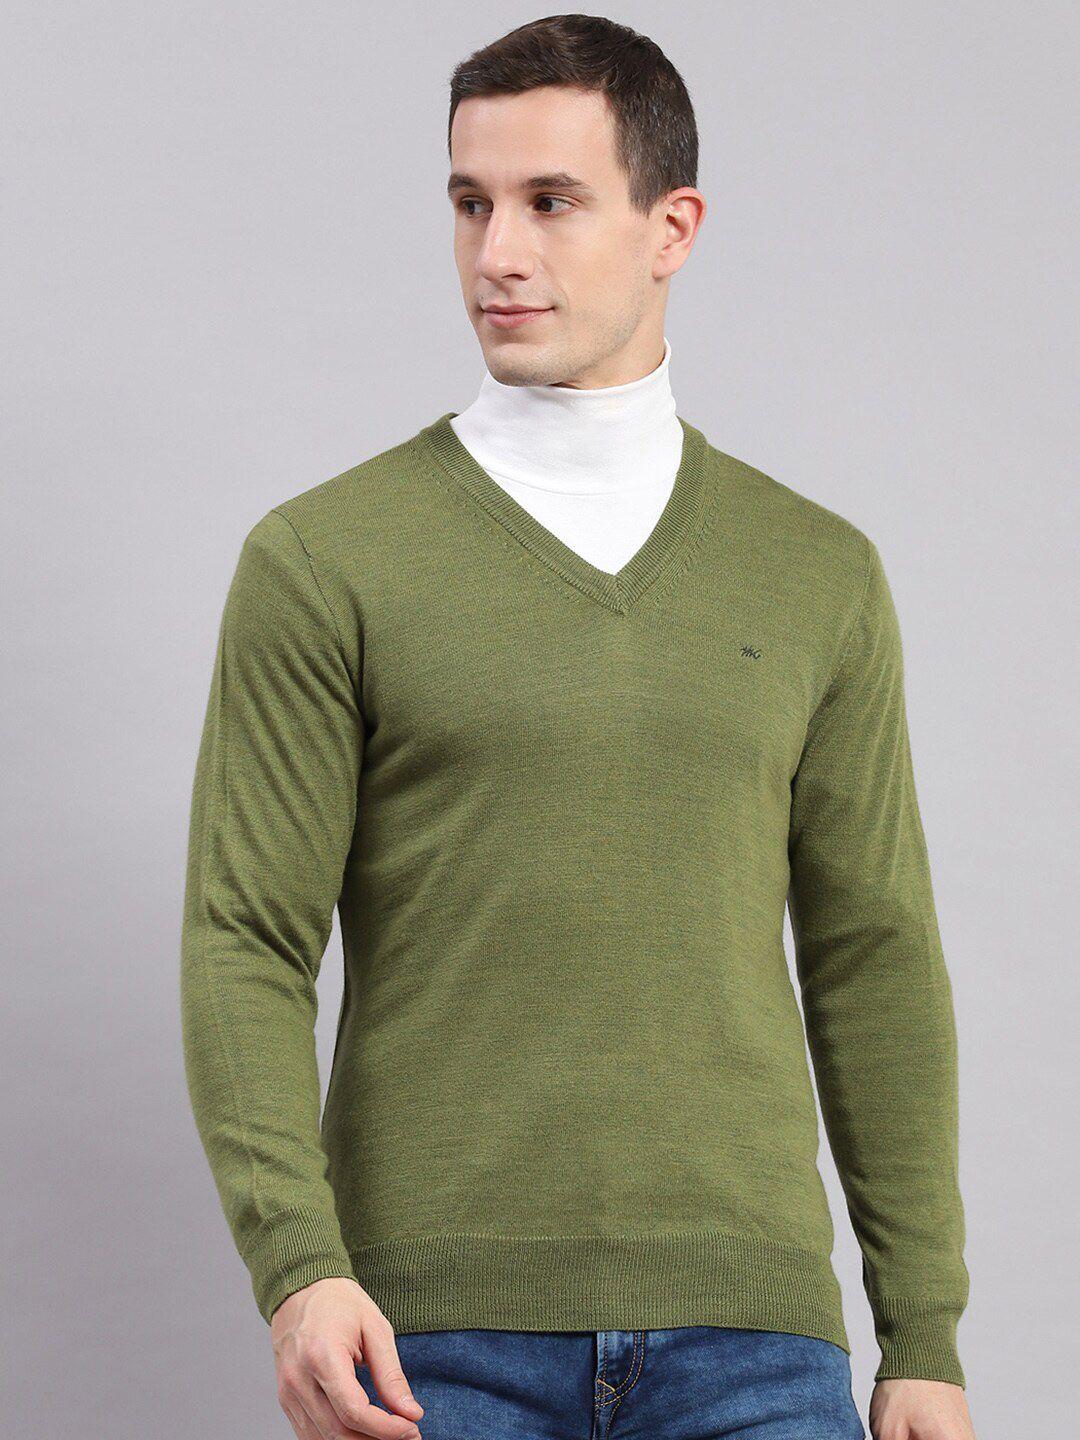 monte carlo v- neck ribbed pure woollen pullover